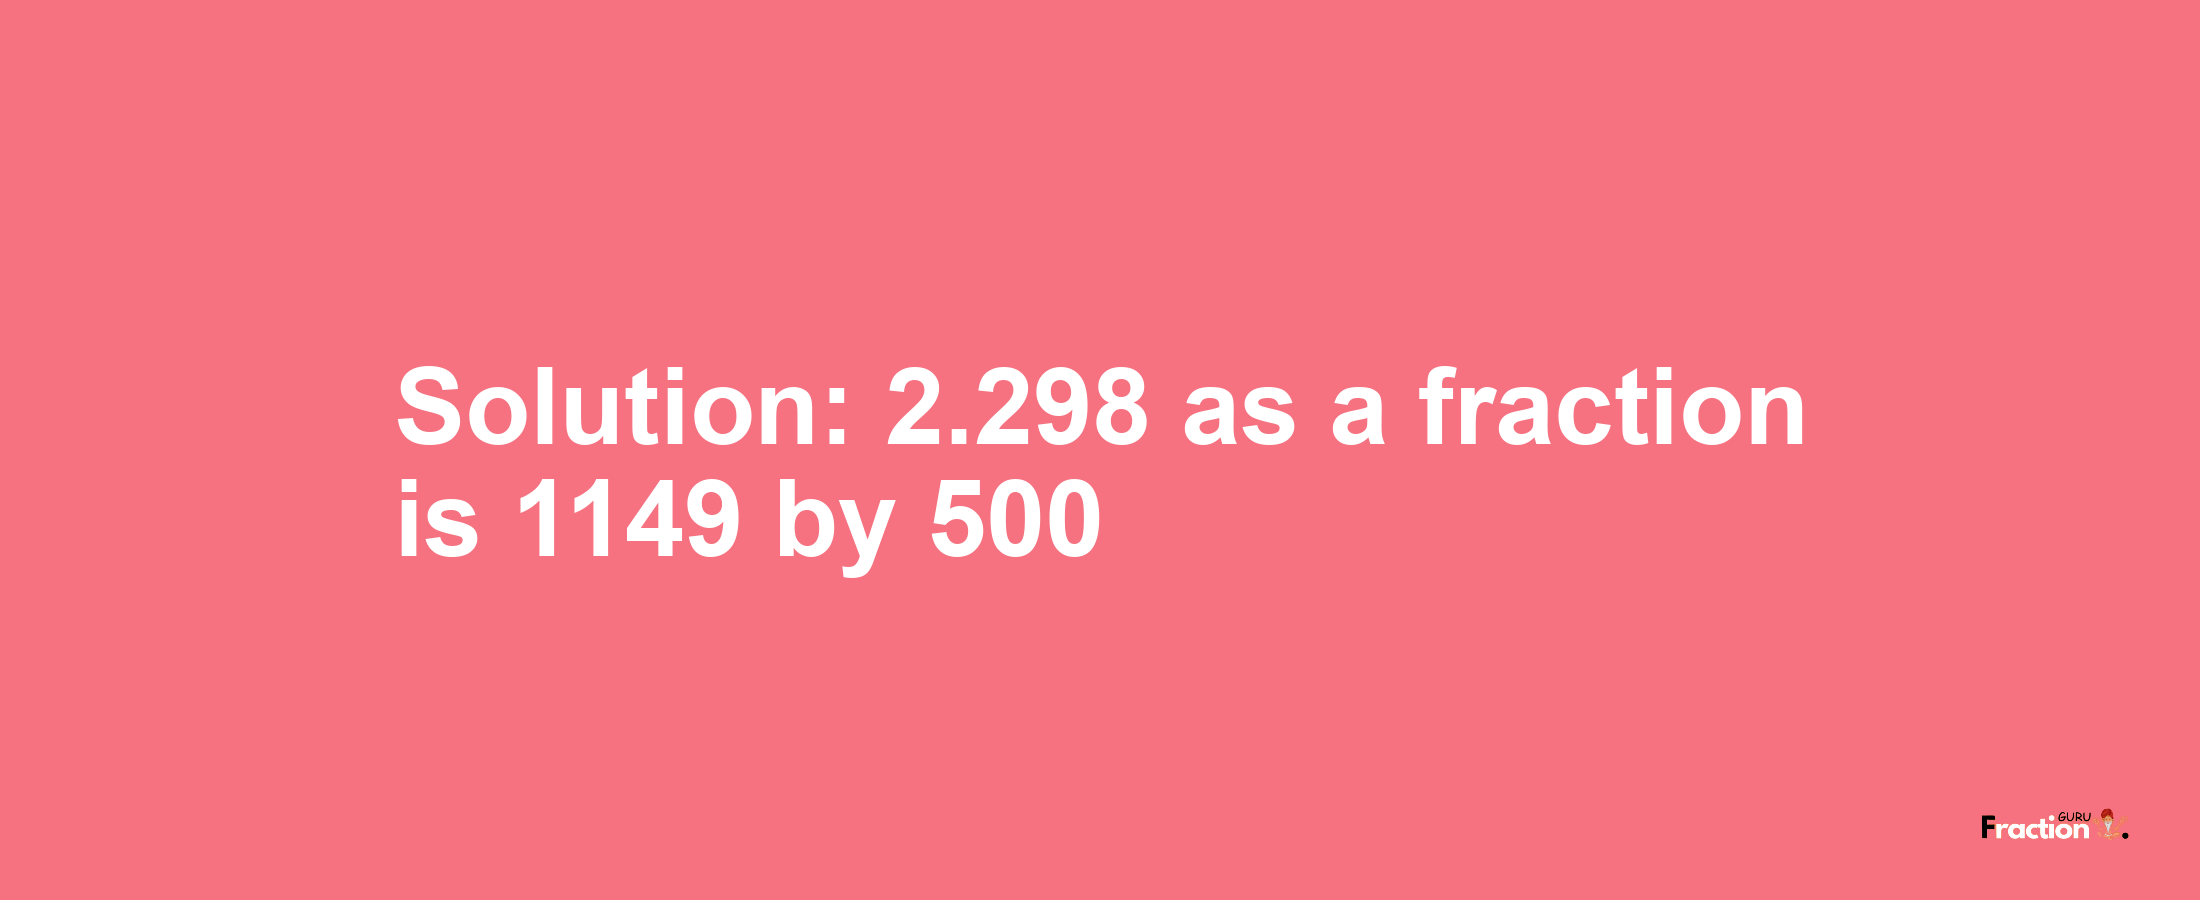 Solution:2.298 as a fraction is 1149/500